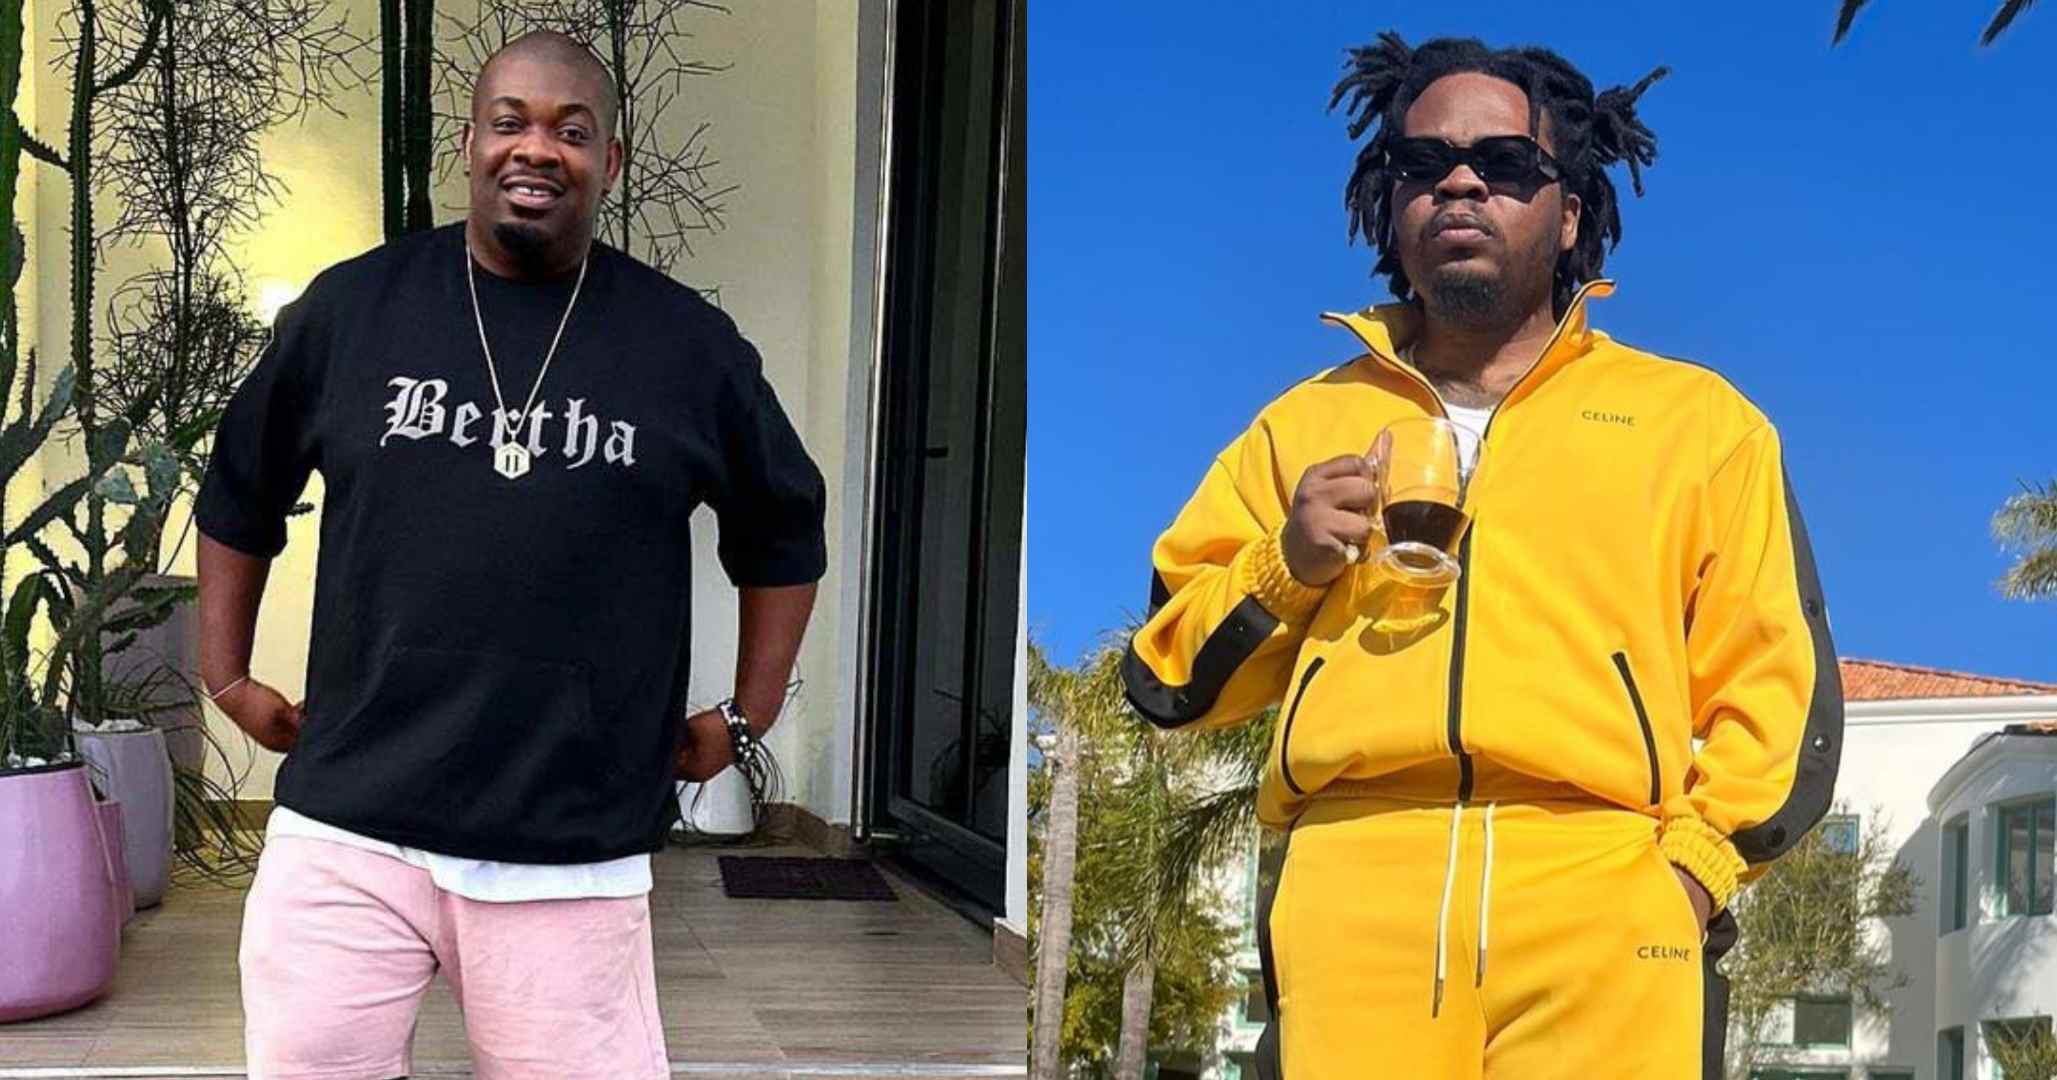 "That was out of character" – Don Jazzy expresses regret over altercation with Olamide at 2015 Headies Awards (Video)